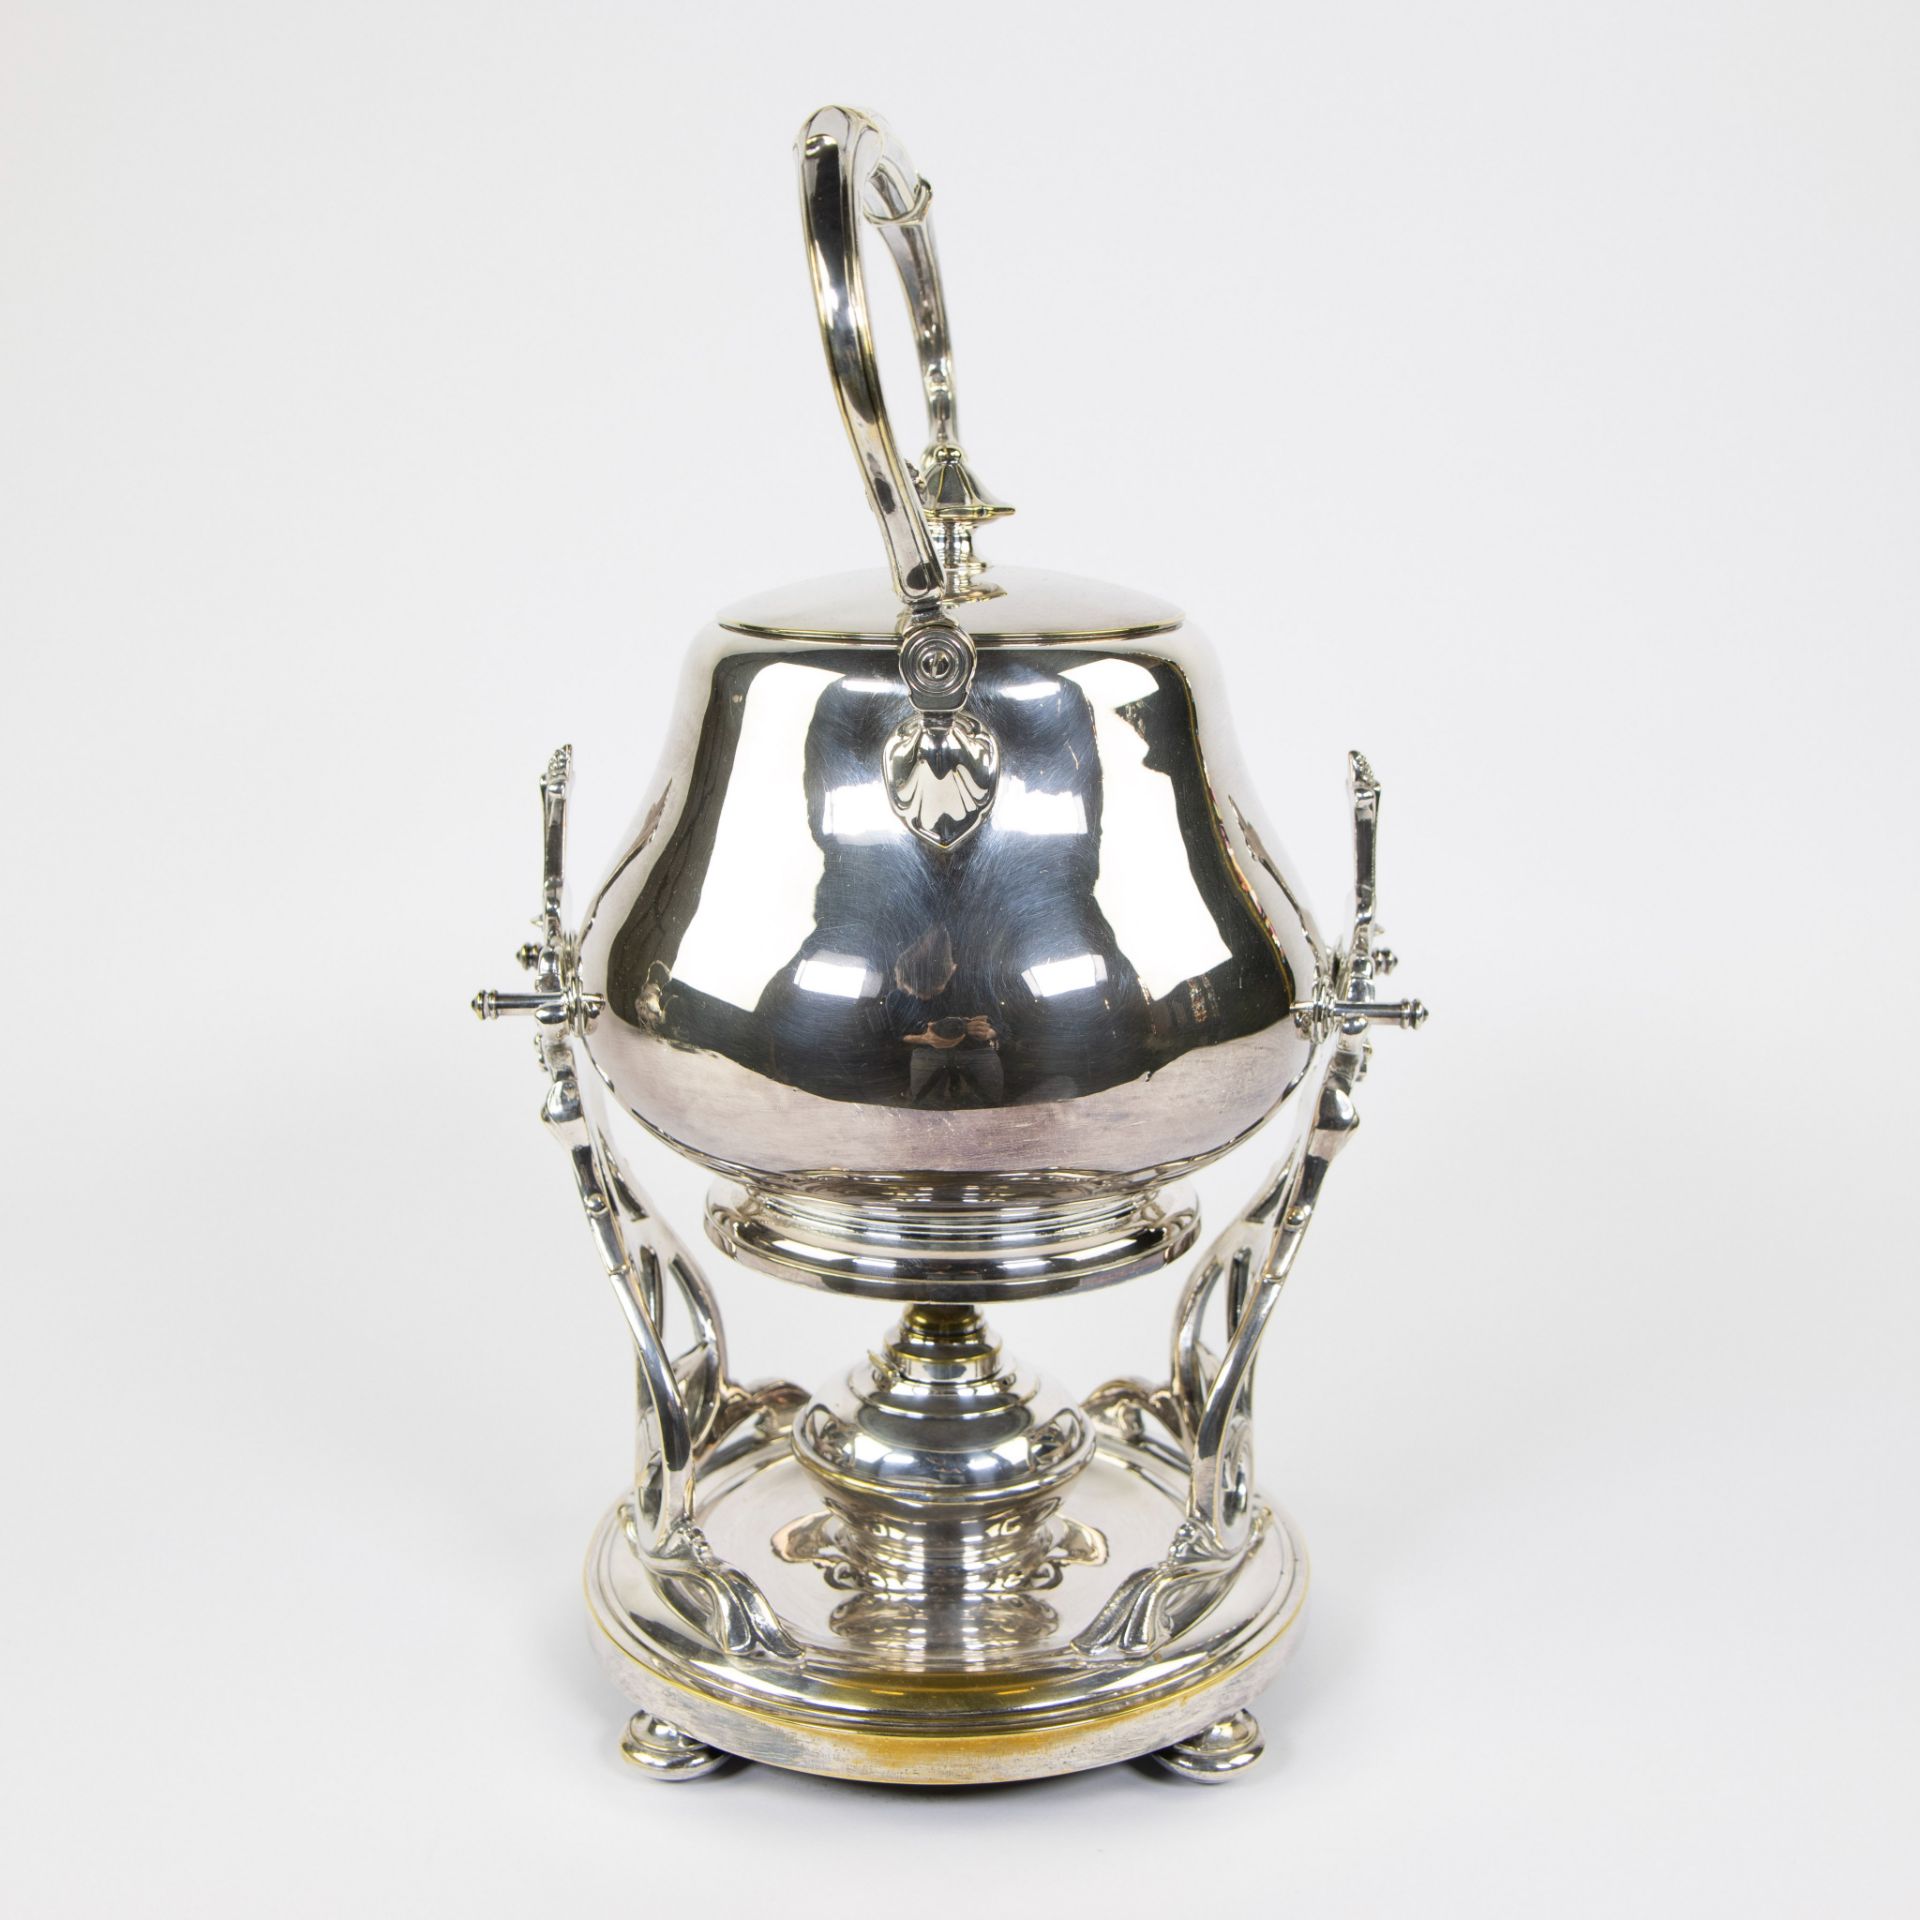 Christofle silver plated teapot on stove - Image 3 of 5